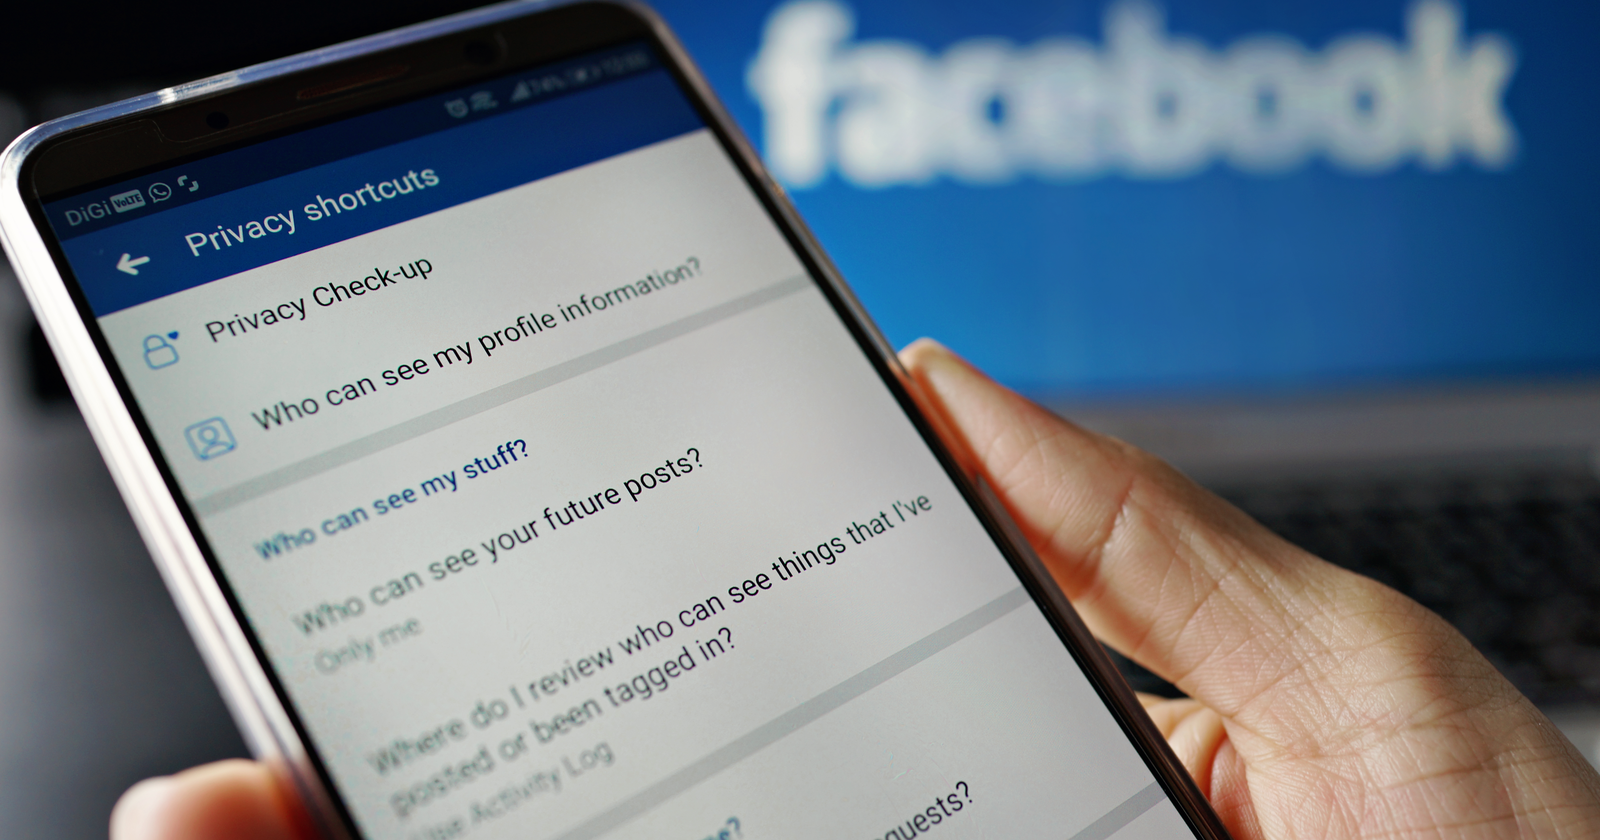 10 Facebook Hacks You Likely Aren't Aware Of